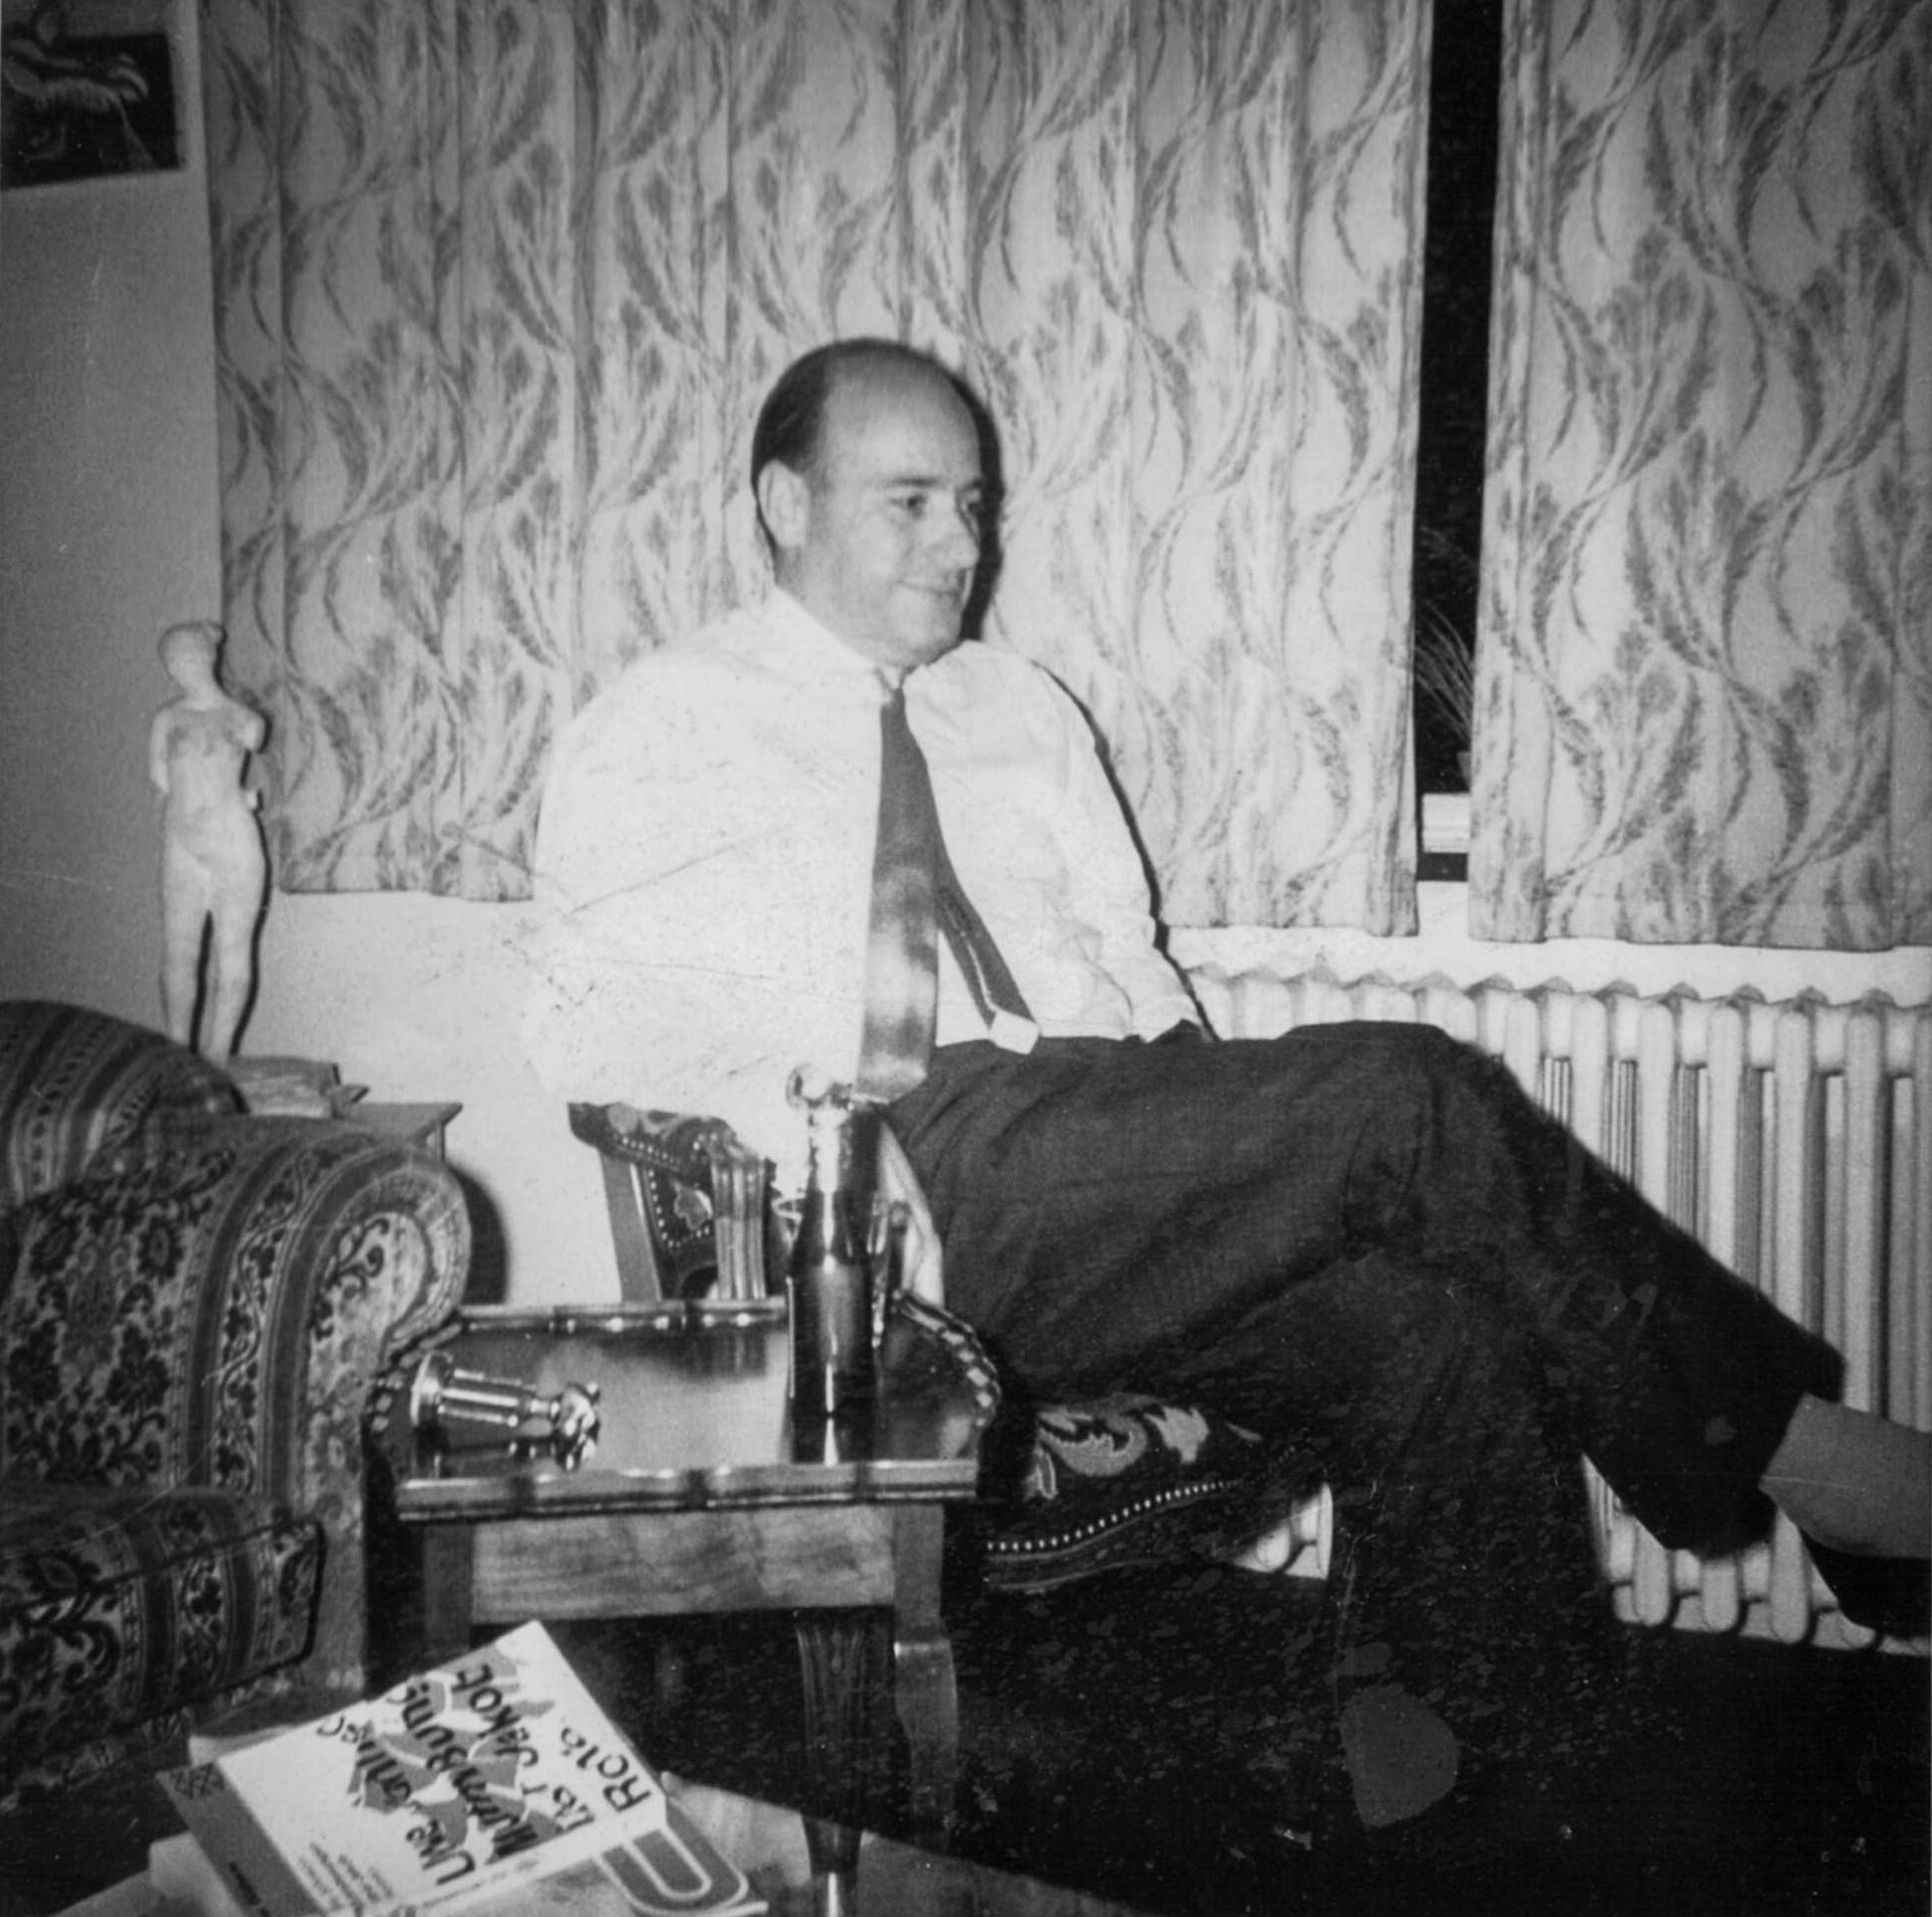 Manfred Klafter, Gershon’s Jewish foster father circa early 1950s